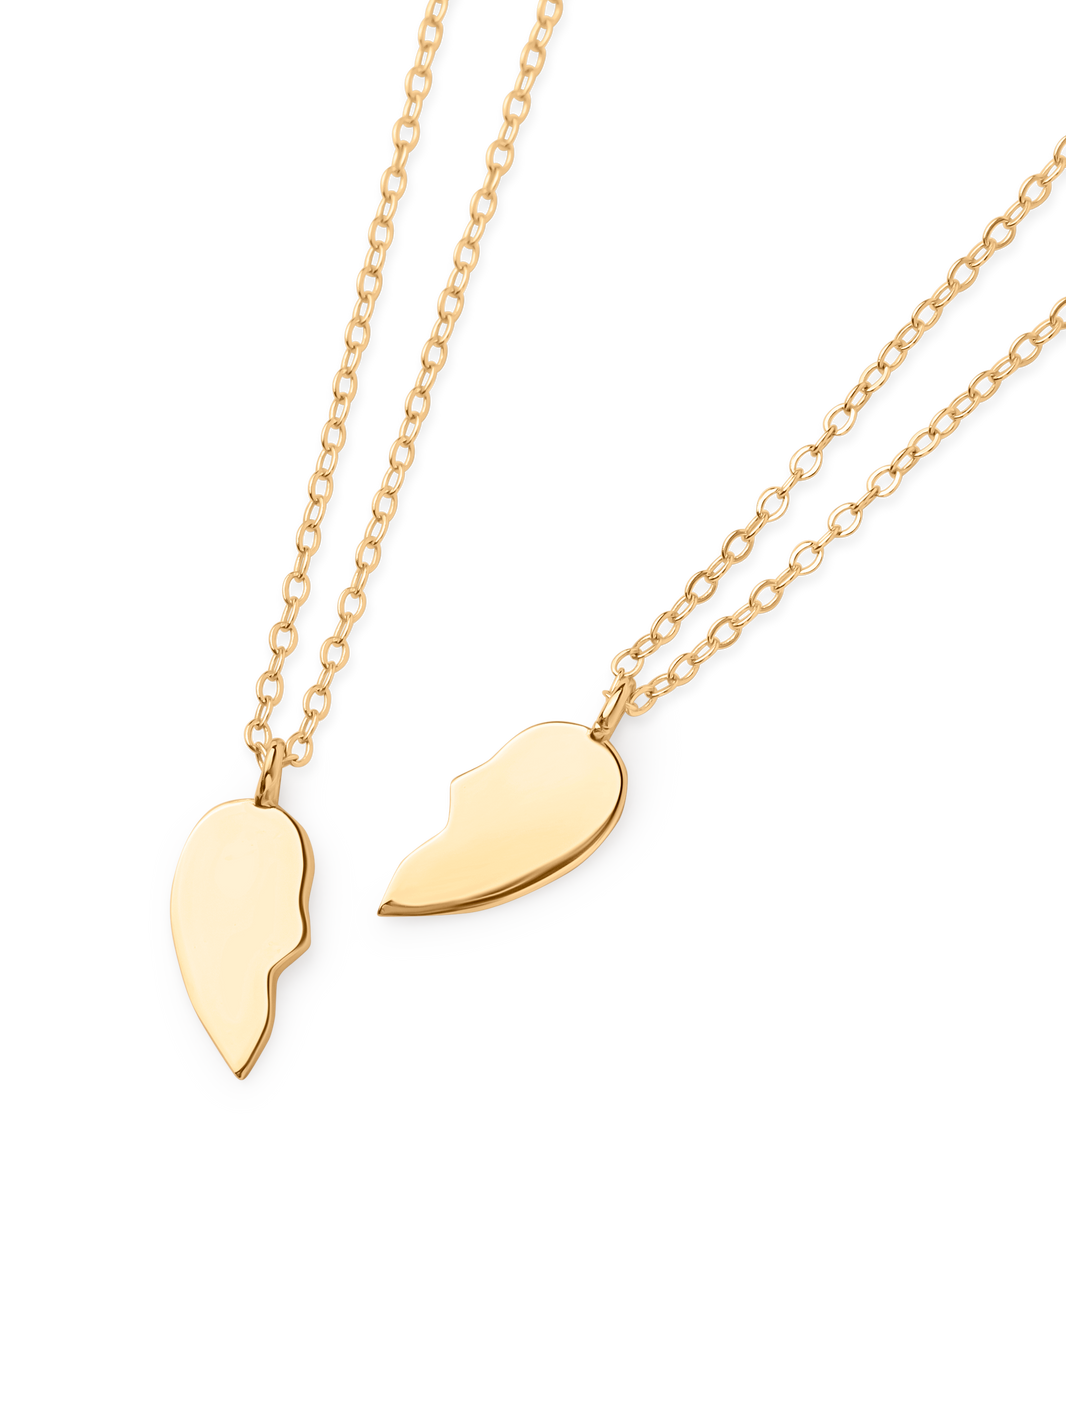 shared heart necklace 18k gold plated brass